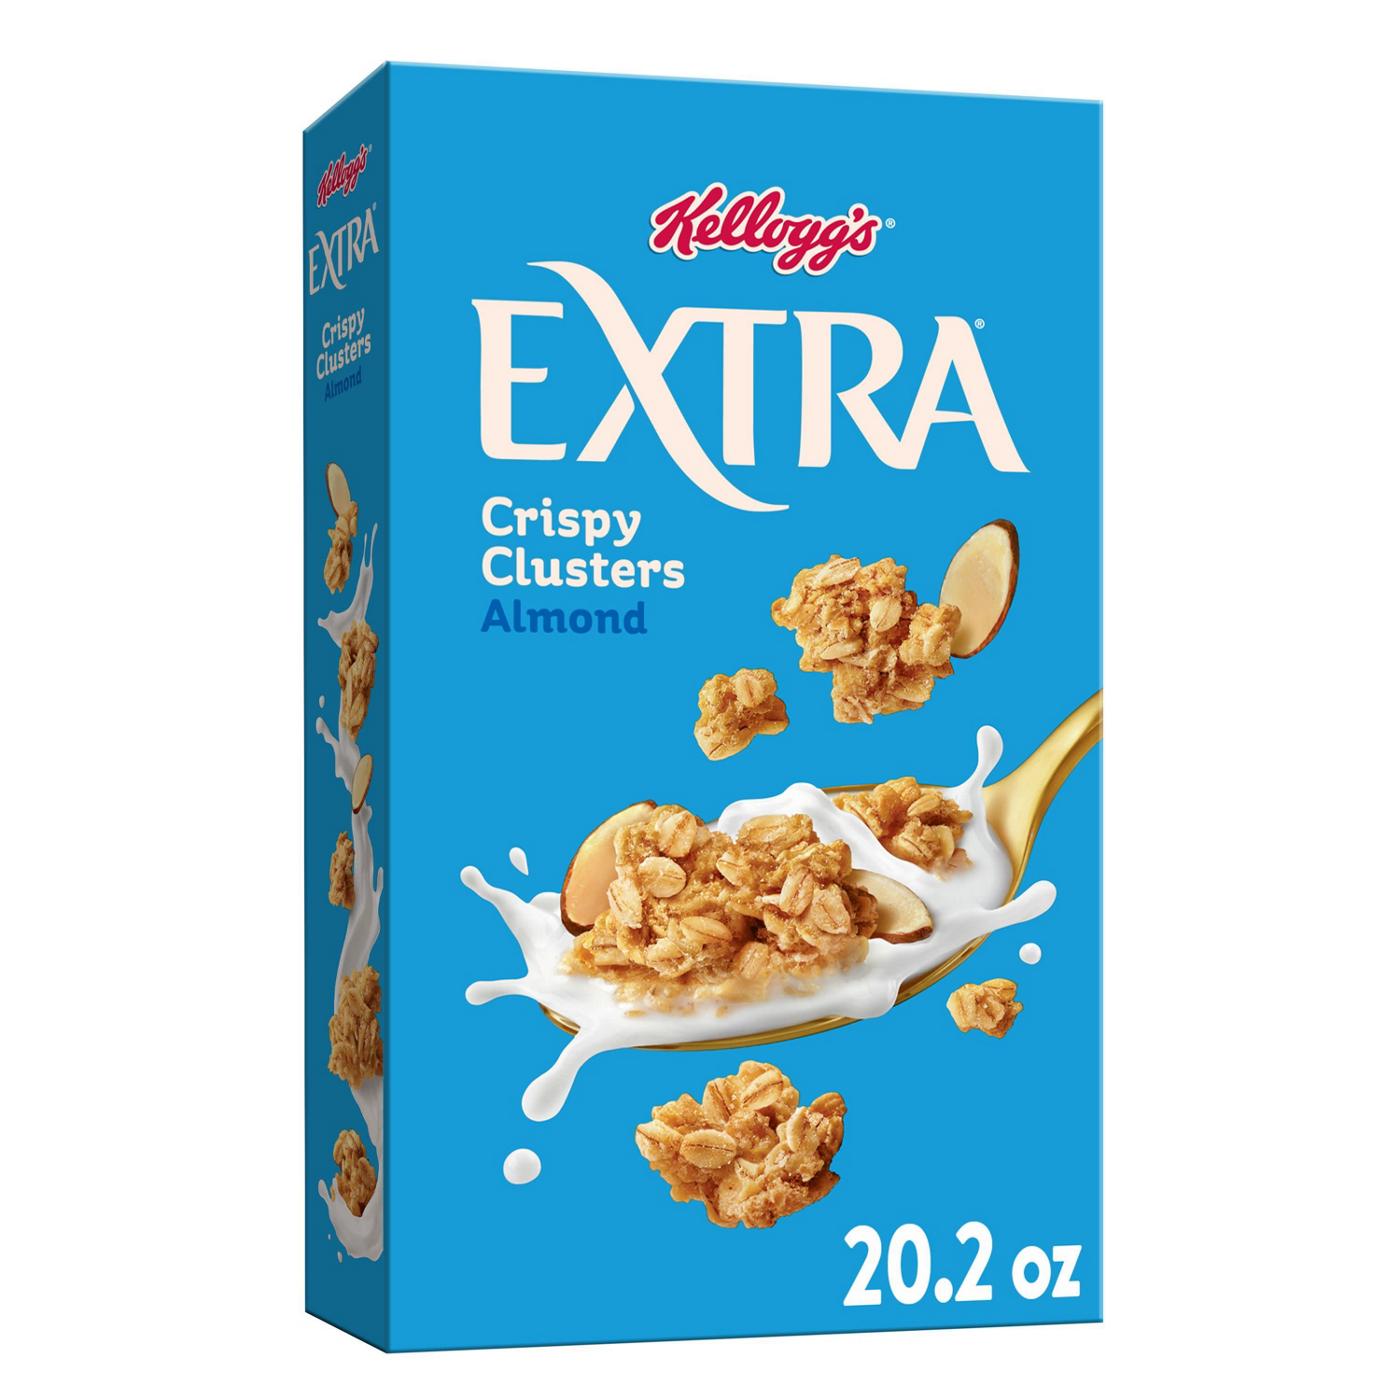 Kellogg's Extra Crispy Clusters Almond Cereal; image 1 of 5